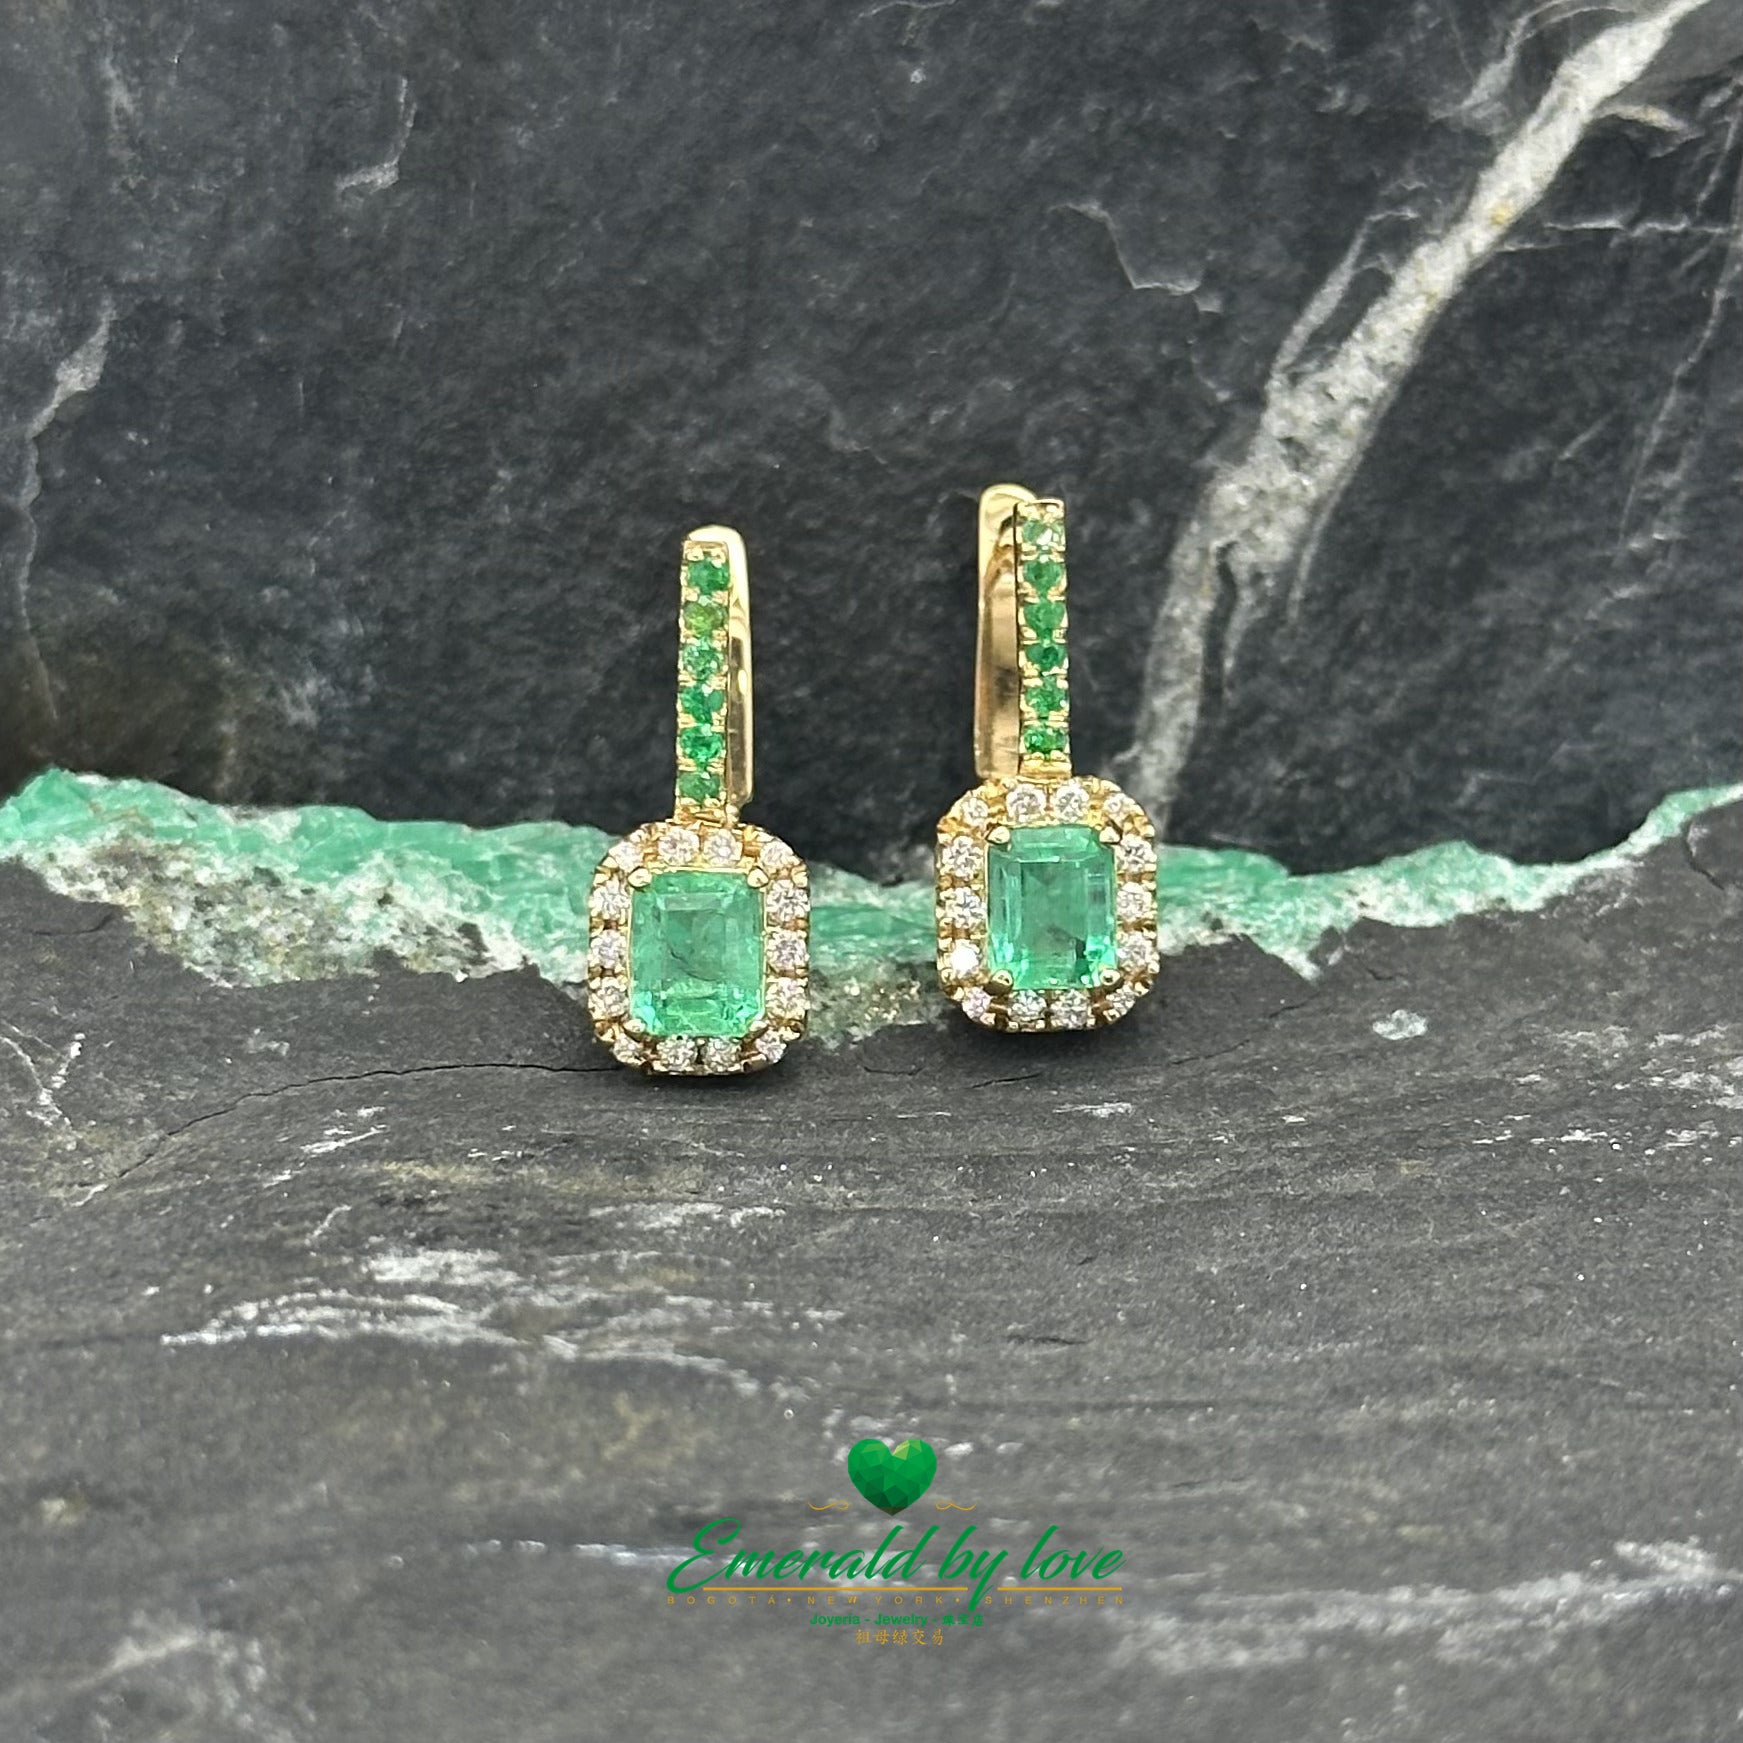 Yellow Gold Hoop Earrings with Emeralds and Marquise-cut Emerald Surrounded by Diamonds